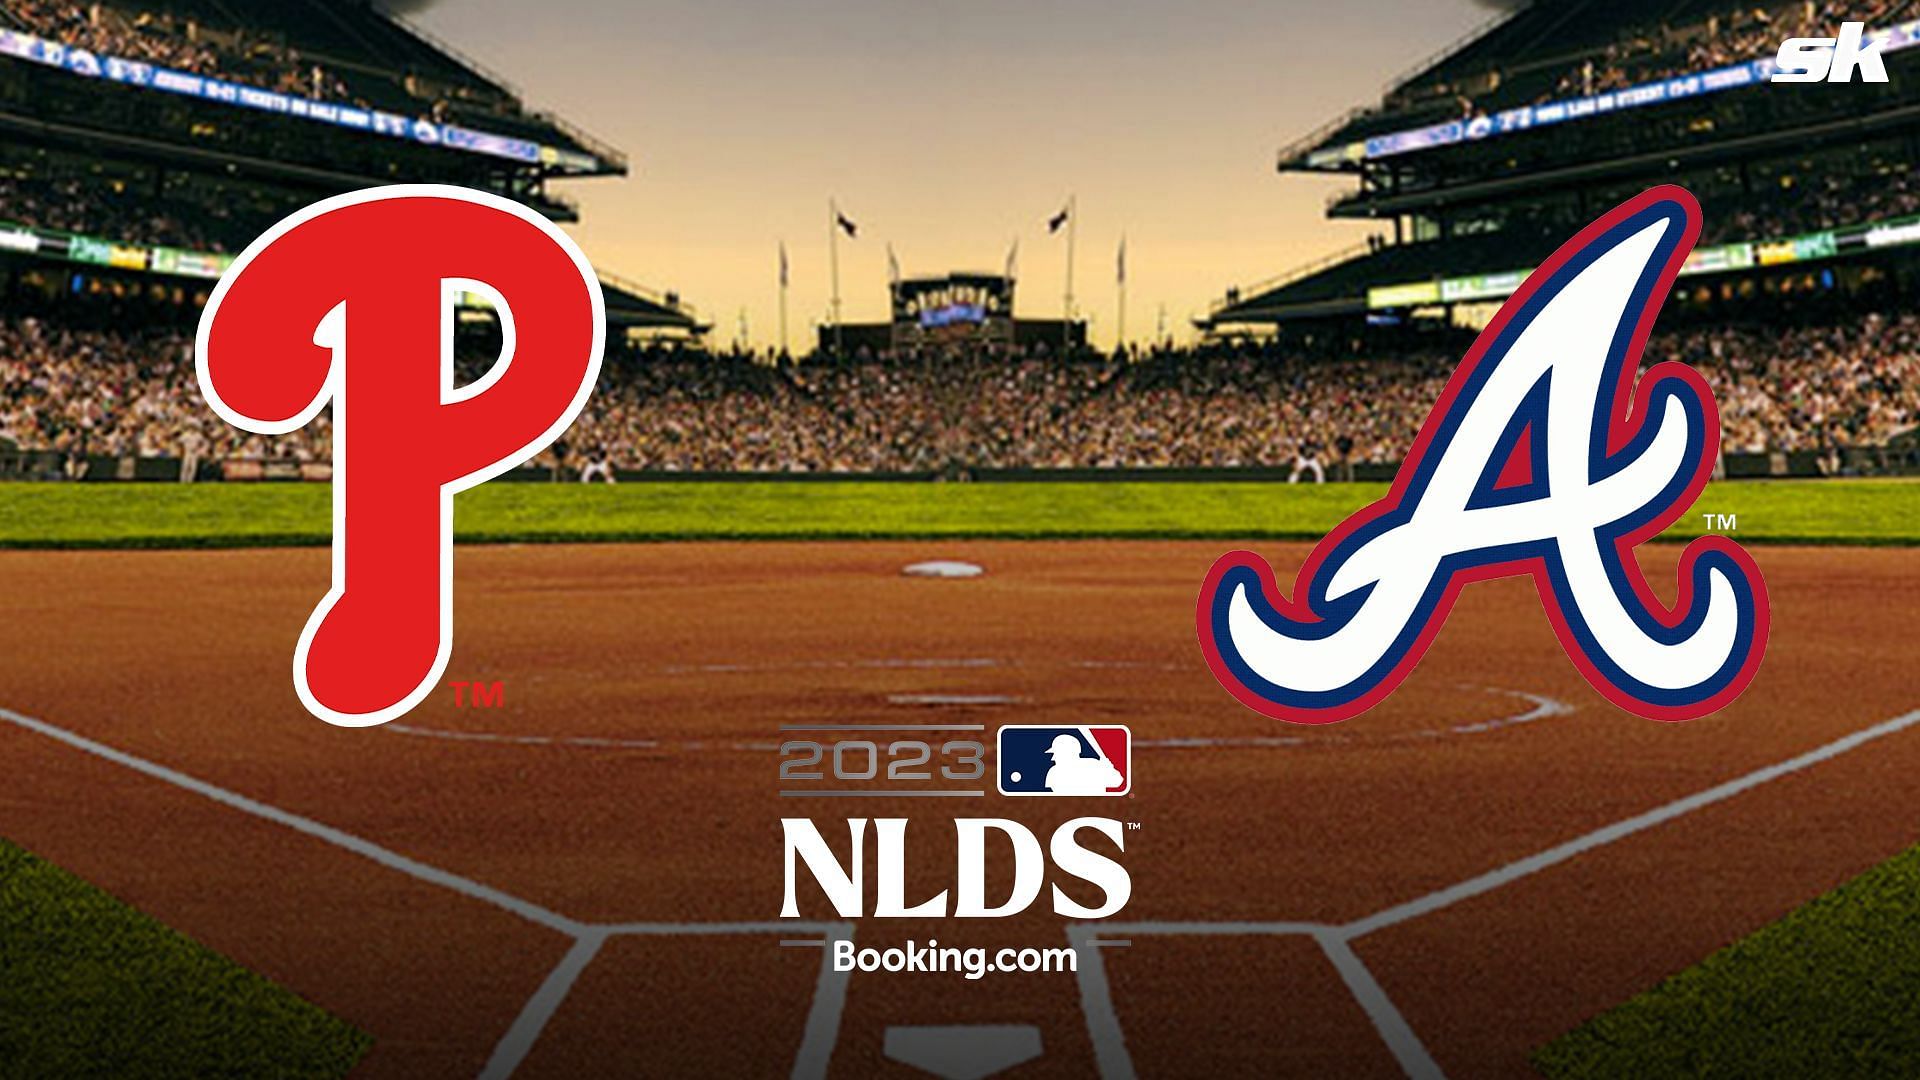 The Atlanta Braves and Philadelphia Phillies are set to square off on Saturday in the opening game of the NLDS